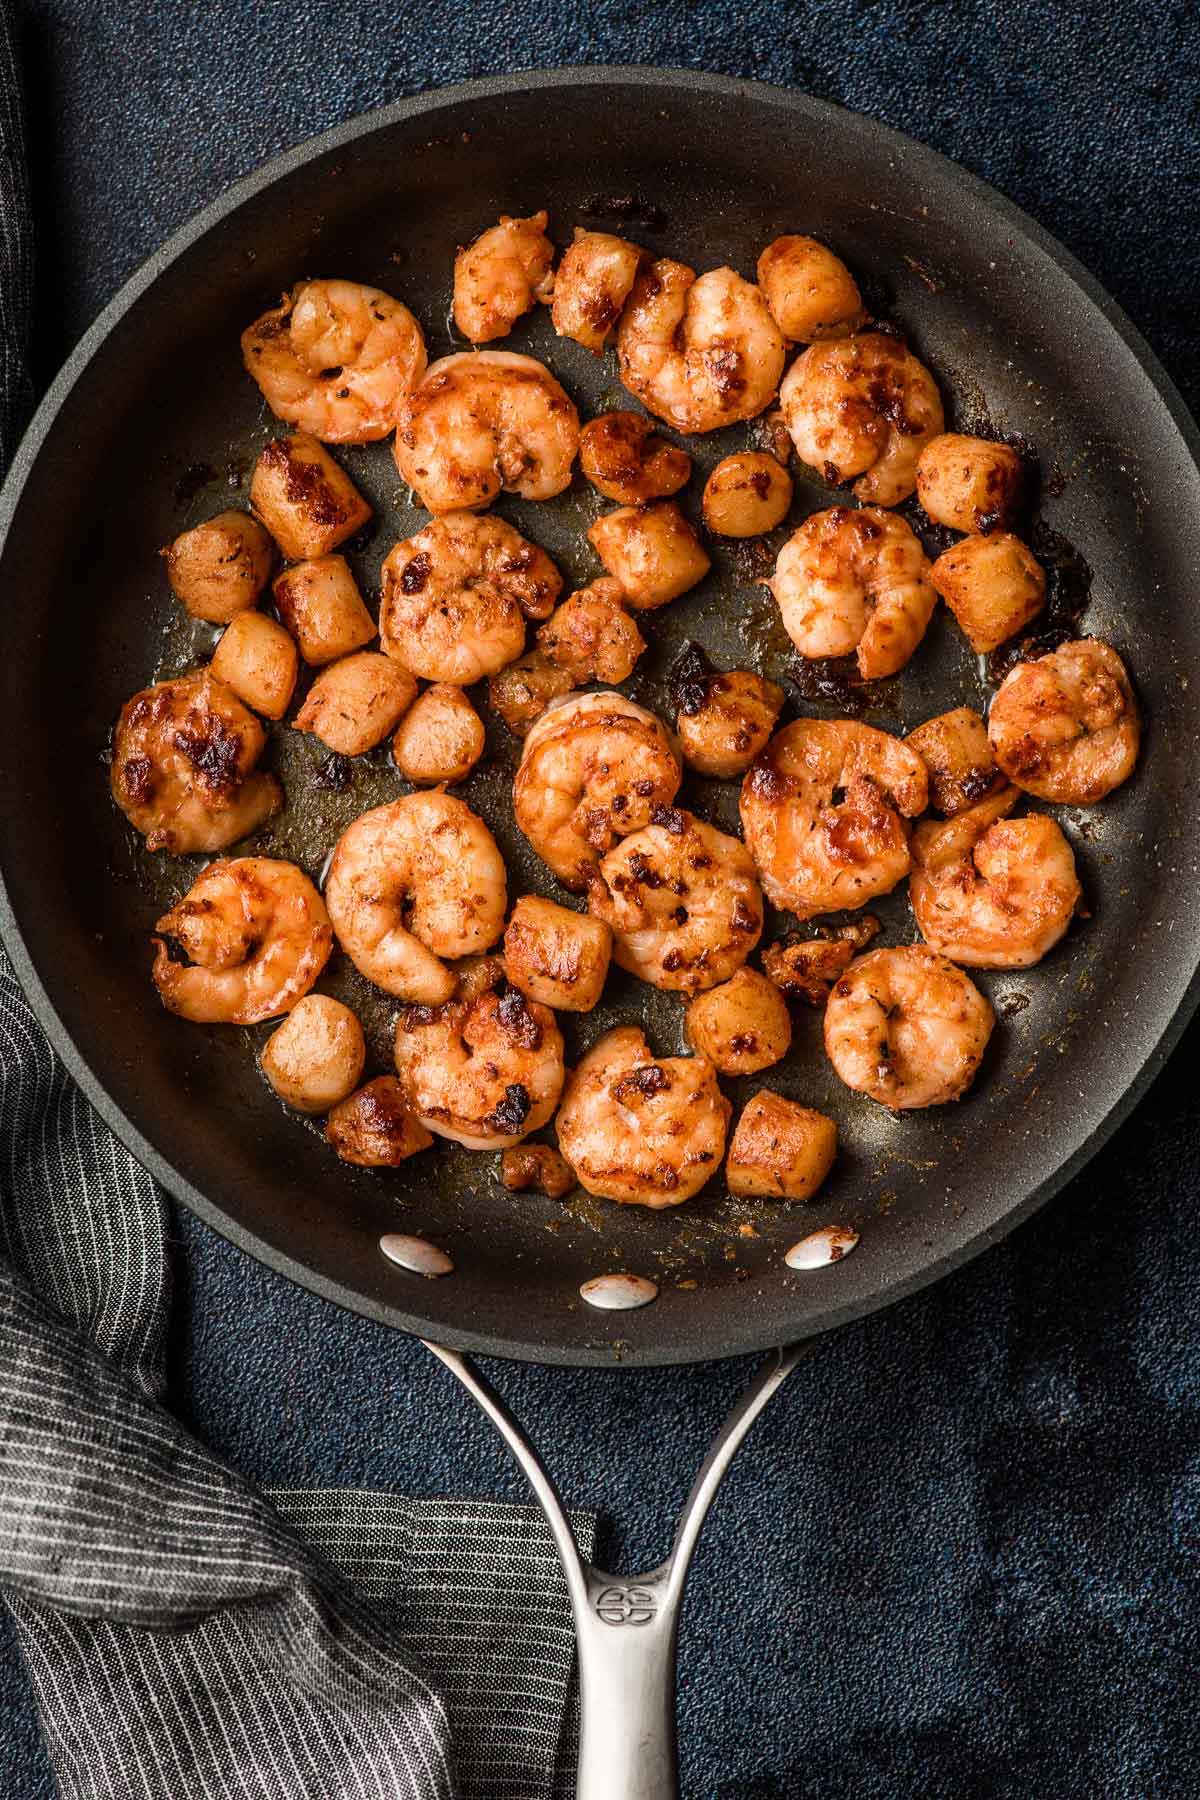 Shrimp and bay scallops shown seasoned and cooked in a dark non stick skillet.